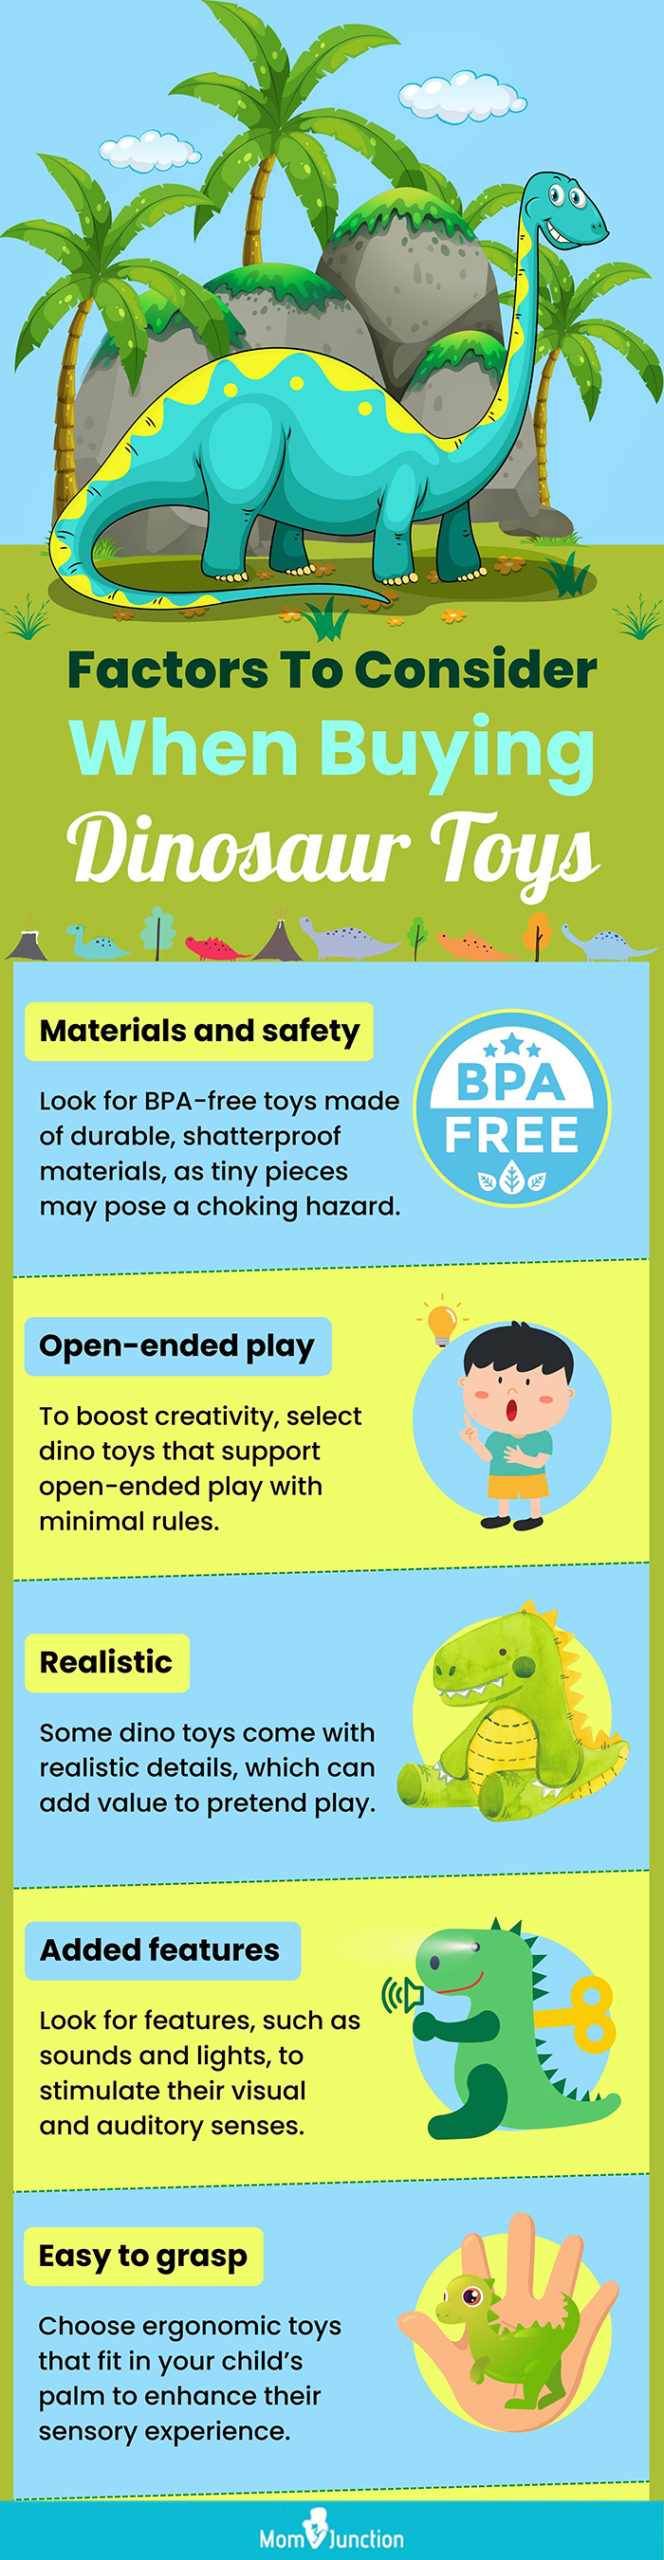 Factors To Consider When Buying Dinosaur Toys [infographic]